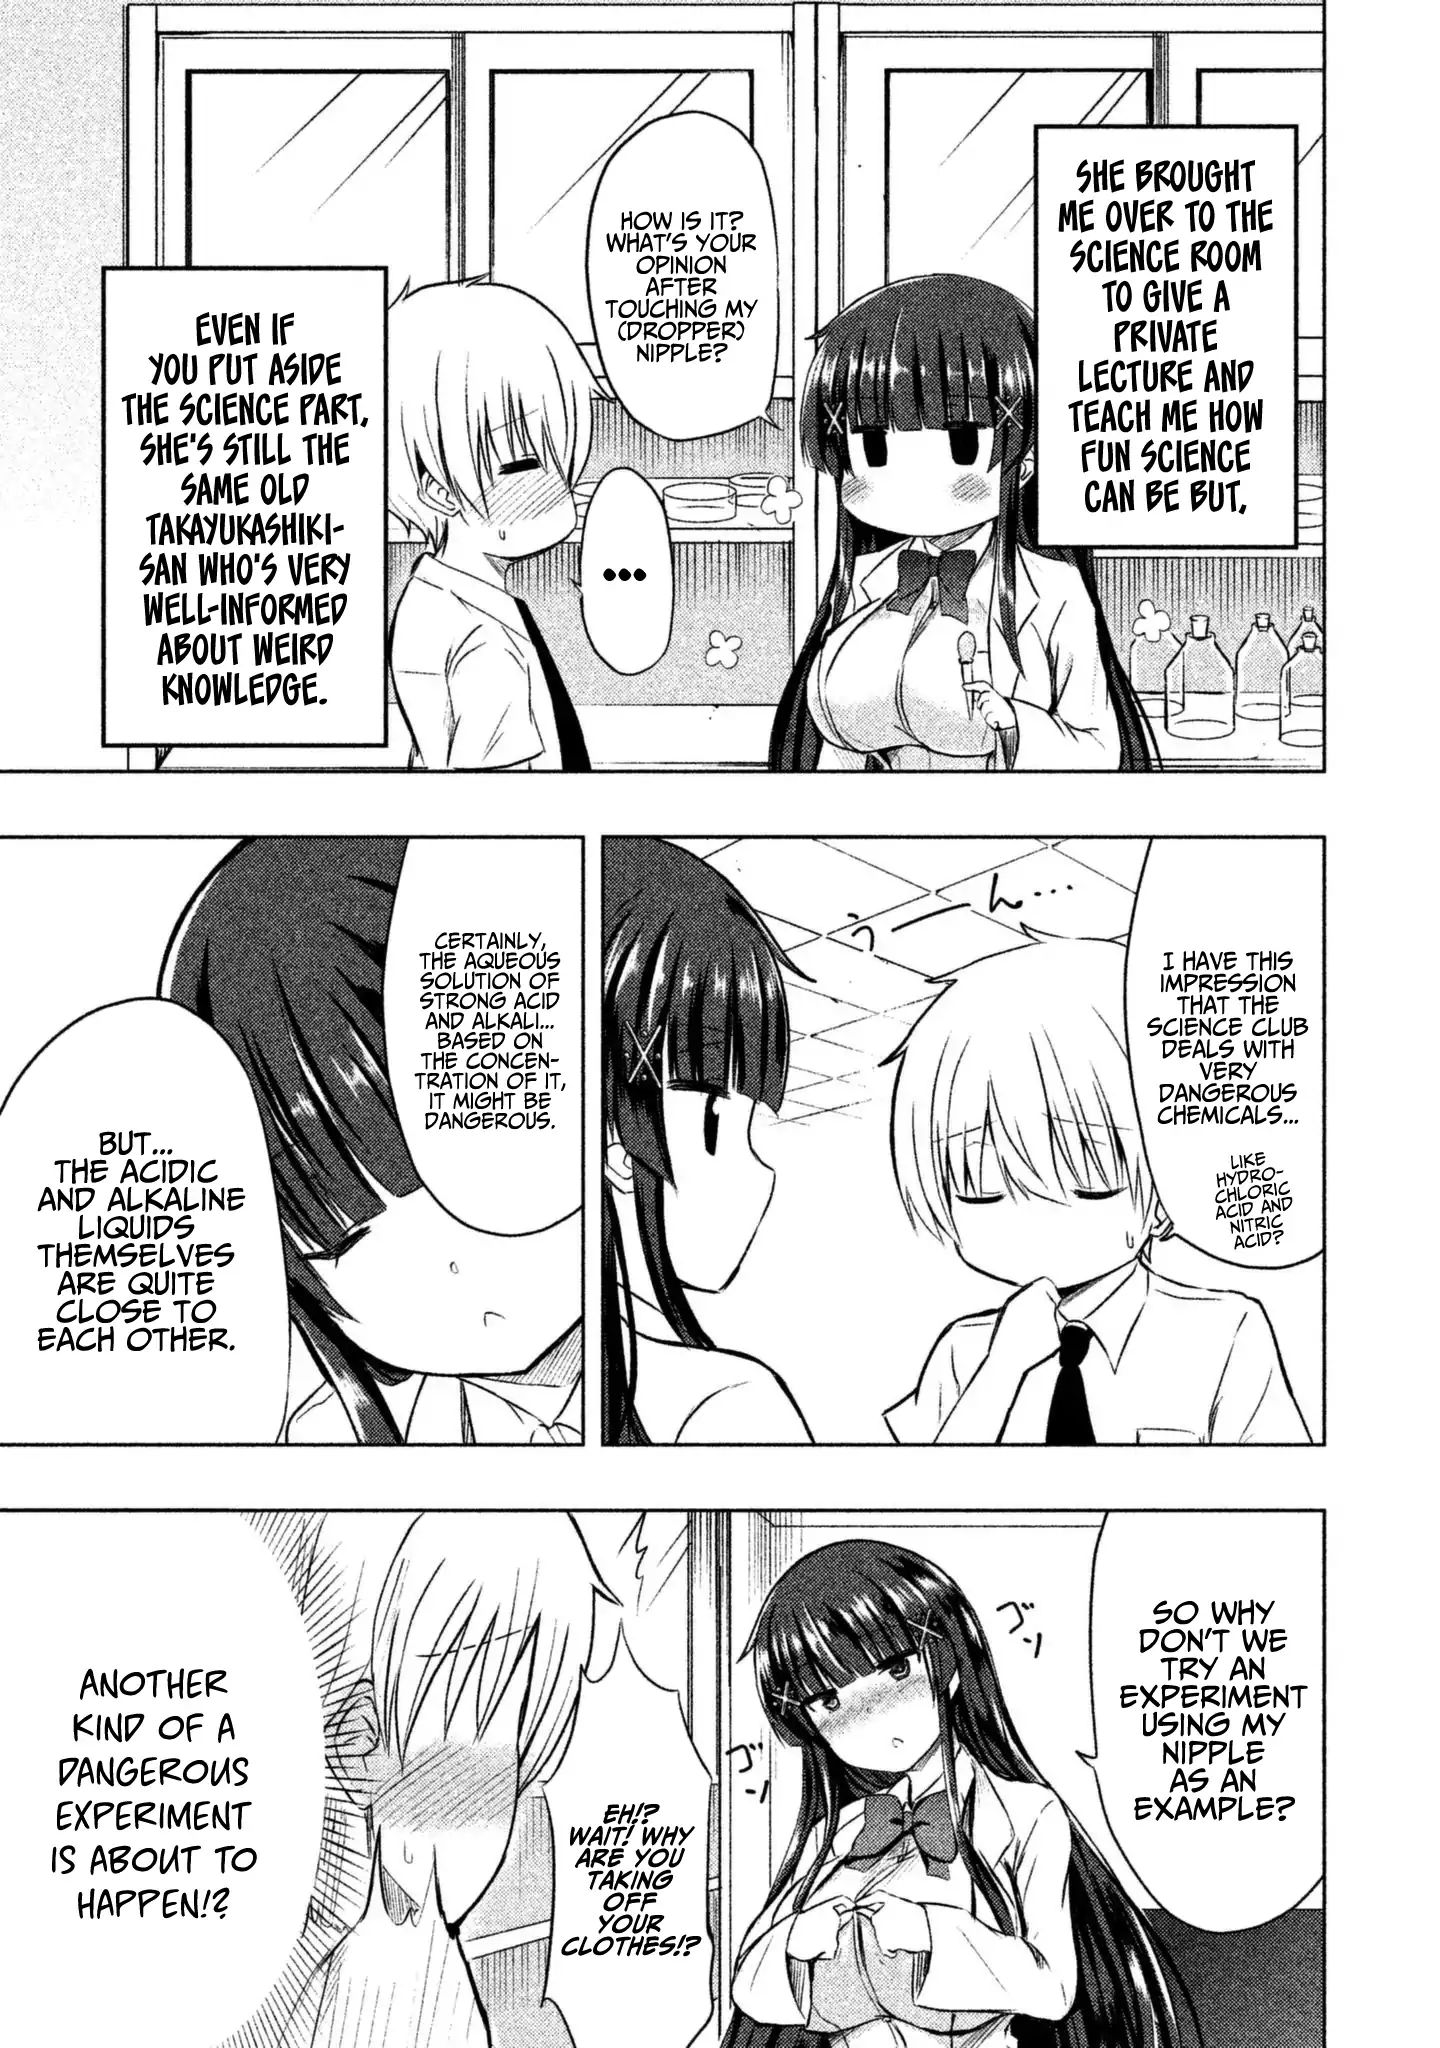 A Girl Who Is Very Well-Informed About Weird Knowledge, Takayukashiki Souko-san - chapter 9 - #4